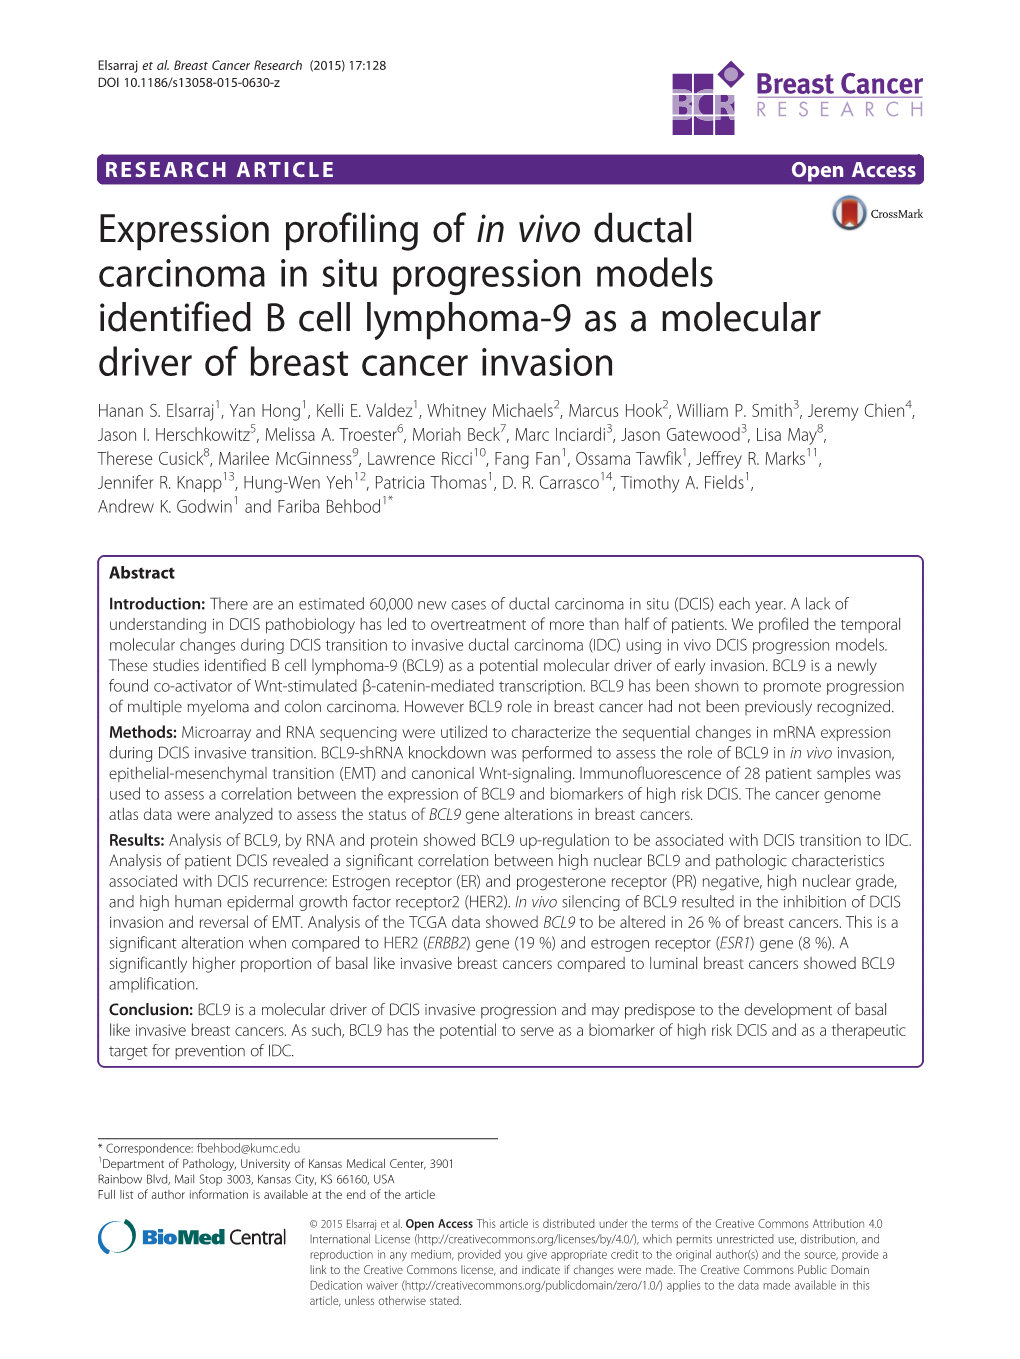 Expression Profiling of in Vivo Ductal Carcinoma in Situ Progression Models Identified B Cell Lymphoma-9 As a Molecular Driver of Breast Cancer Invasion Hanan S